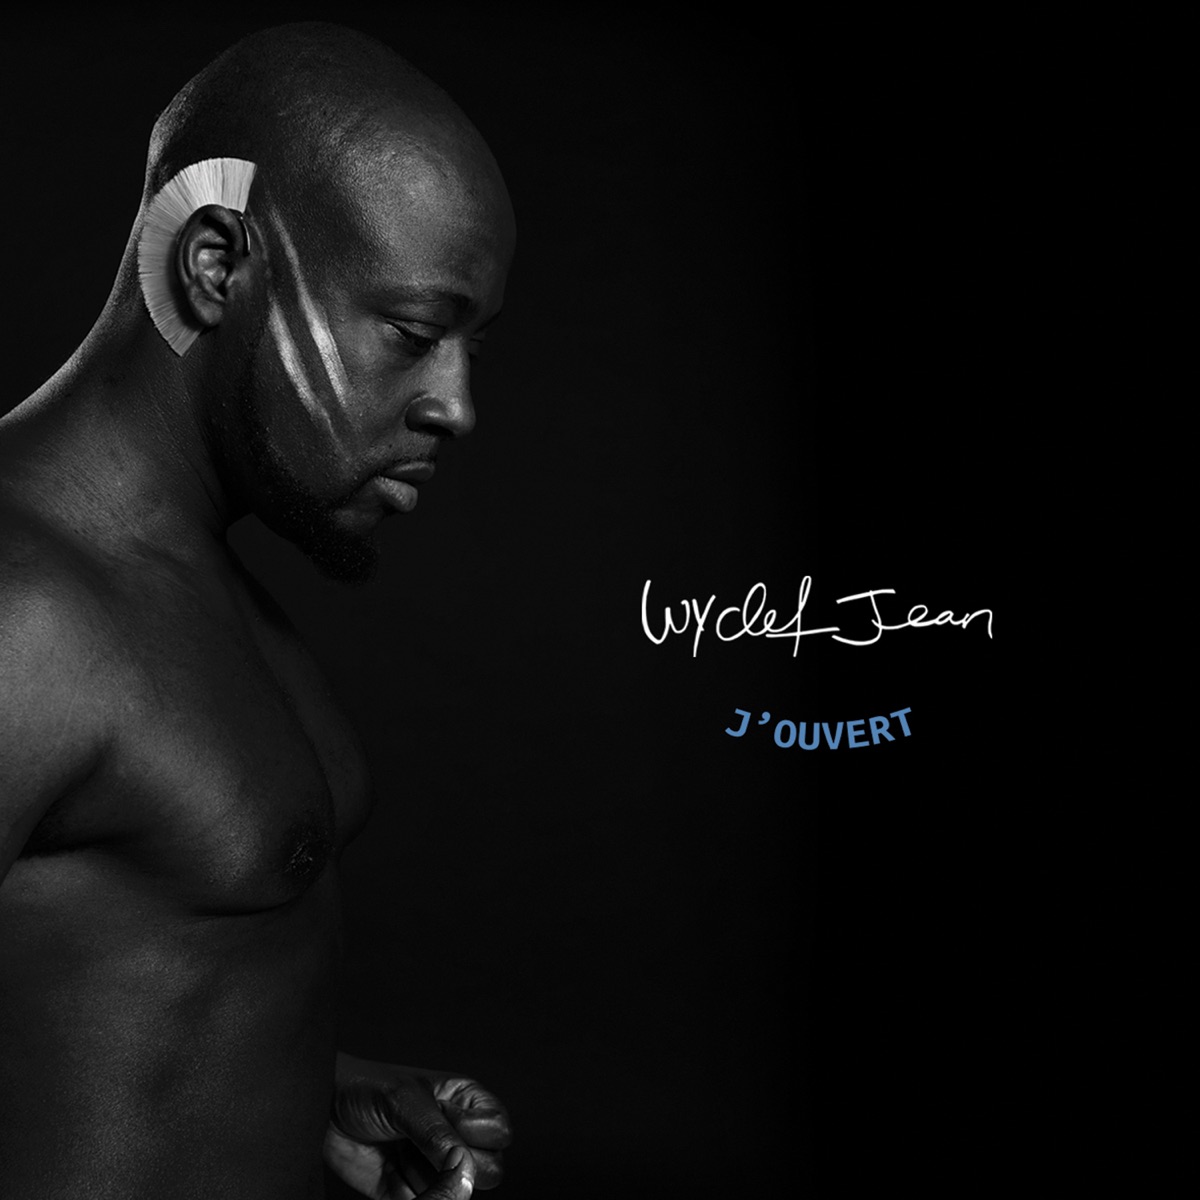 Wyclef Goes Back to School, Vol. 1 by Wyclef Jean on Apple Music